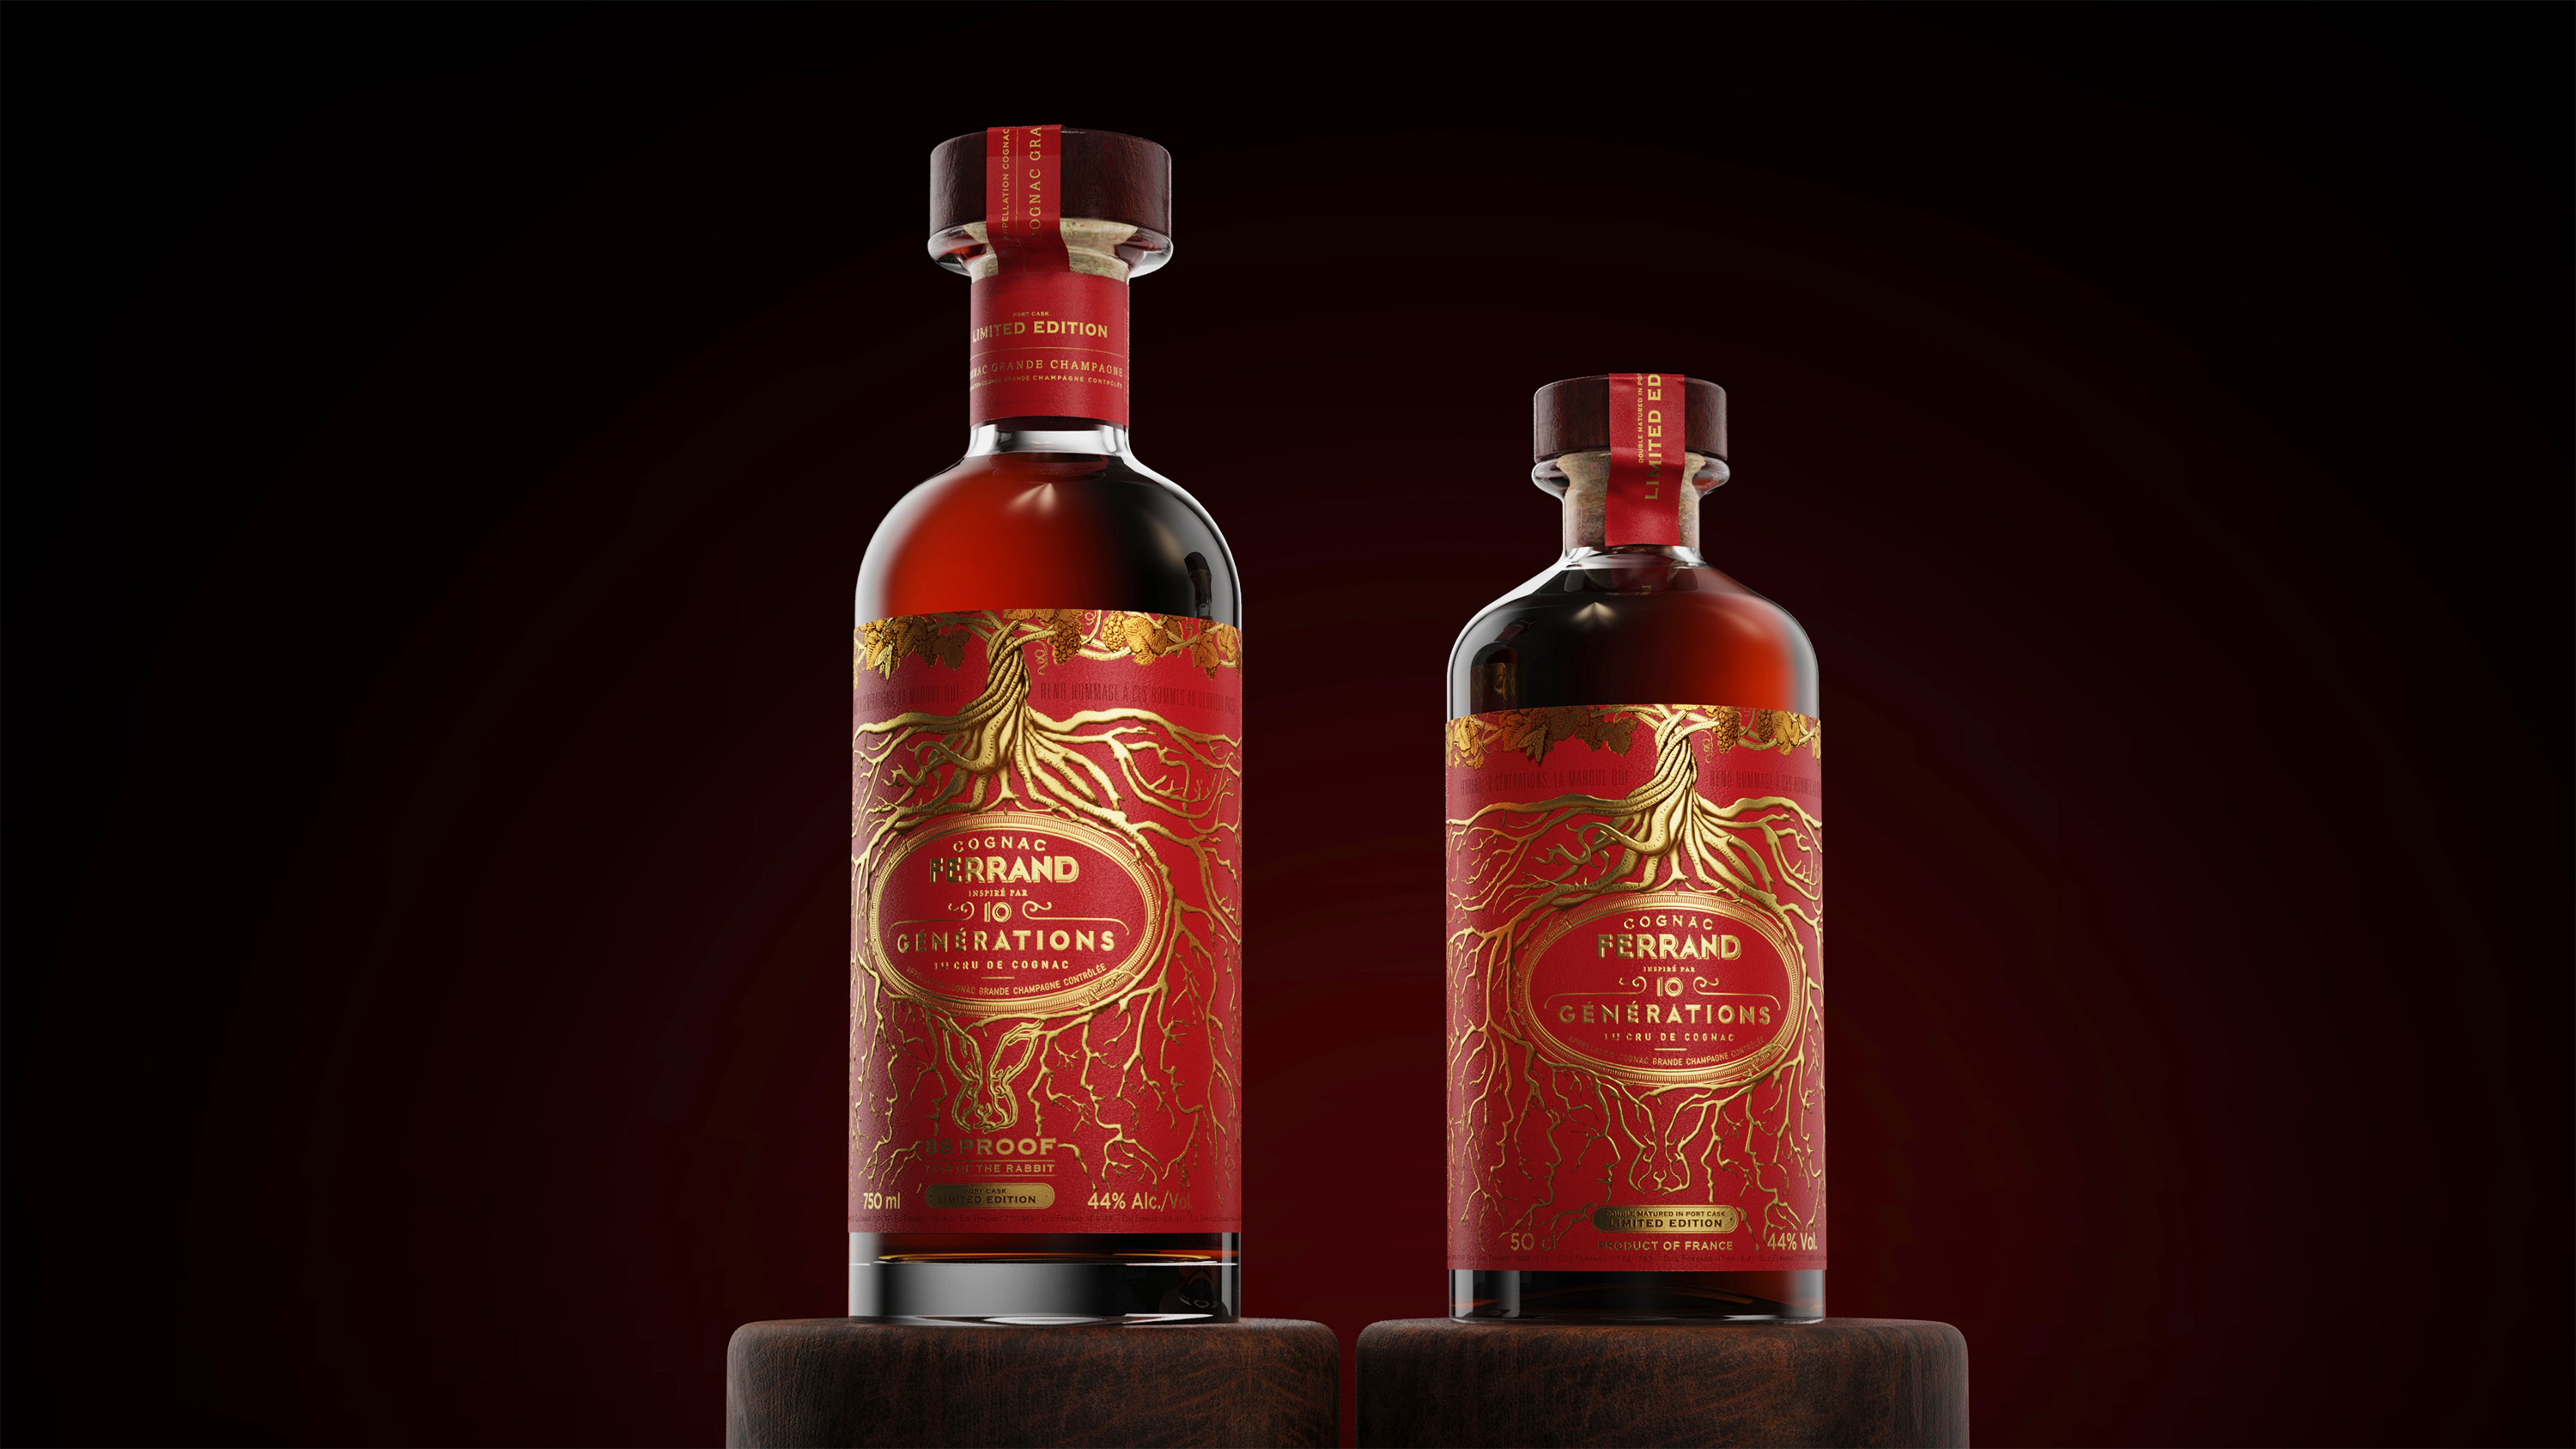 3D Brand Motion for Cognac Ferrand – Ring in the Year of the Rabbit With 10 Generations Port Cask Limited Edition